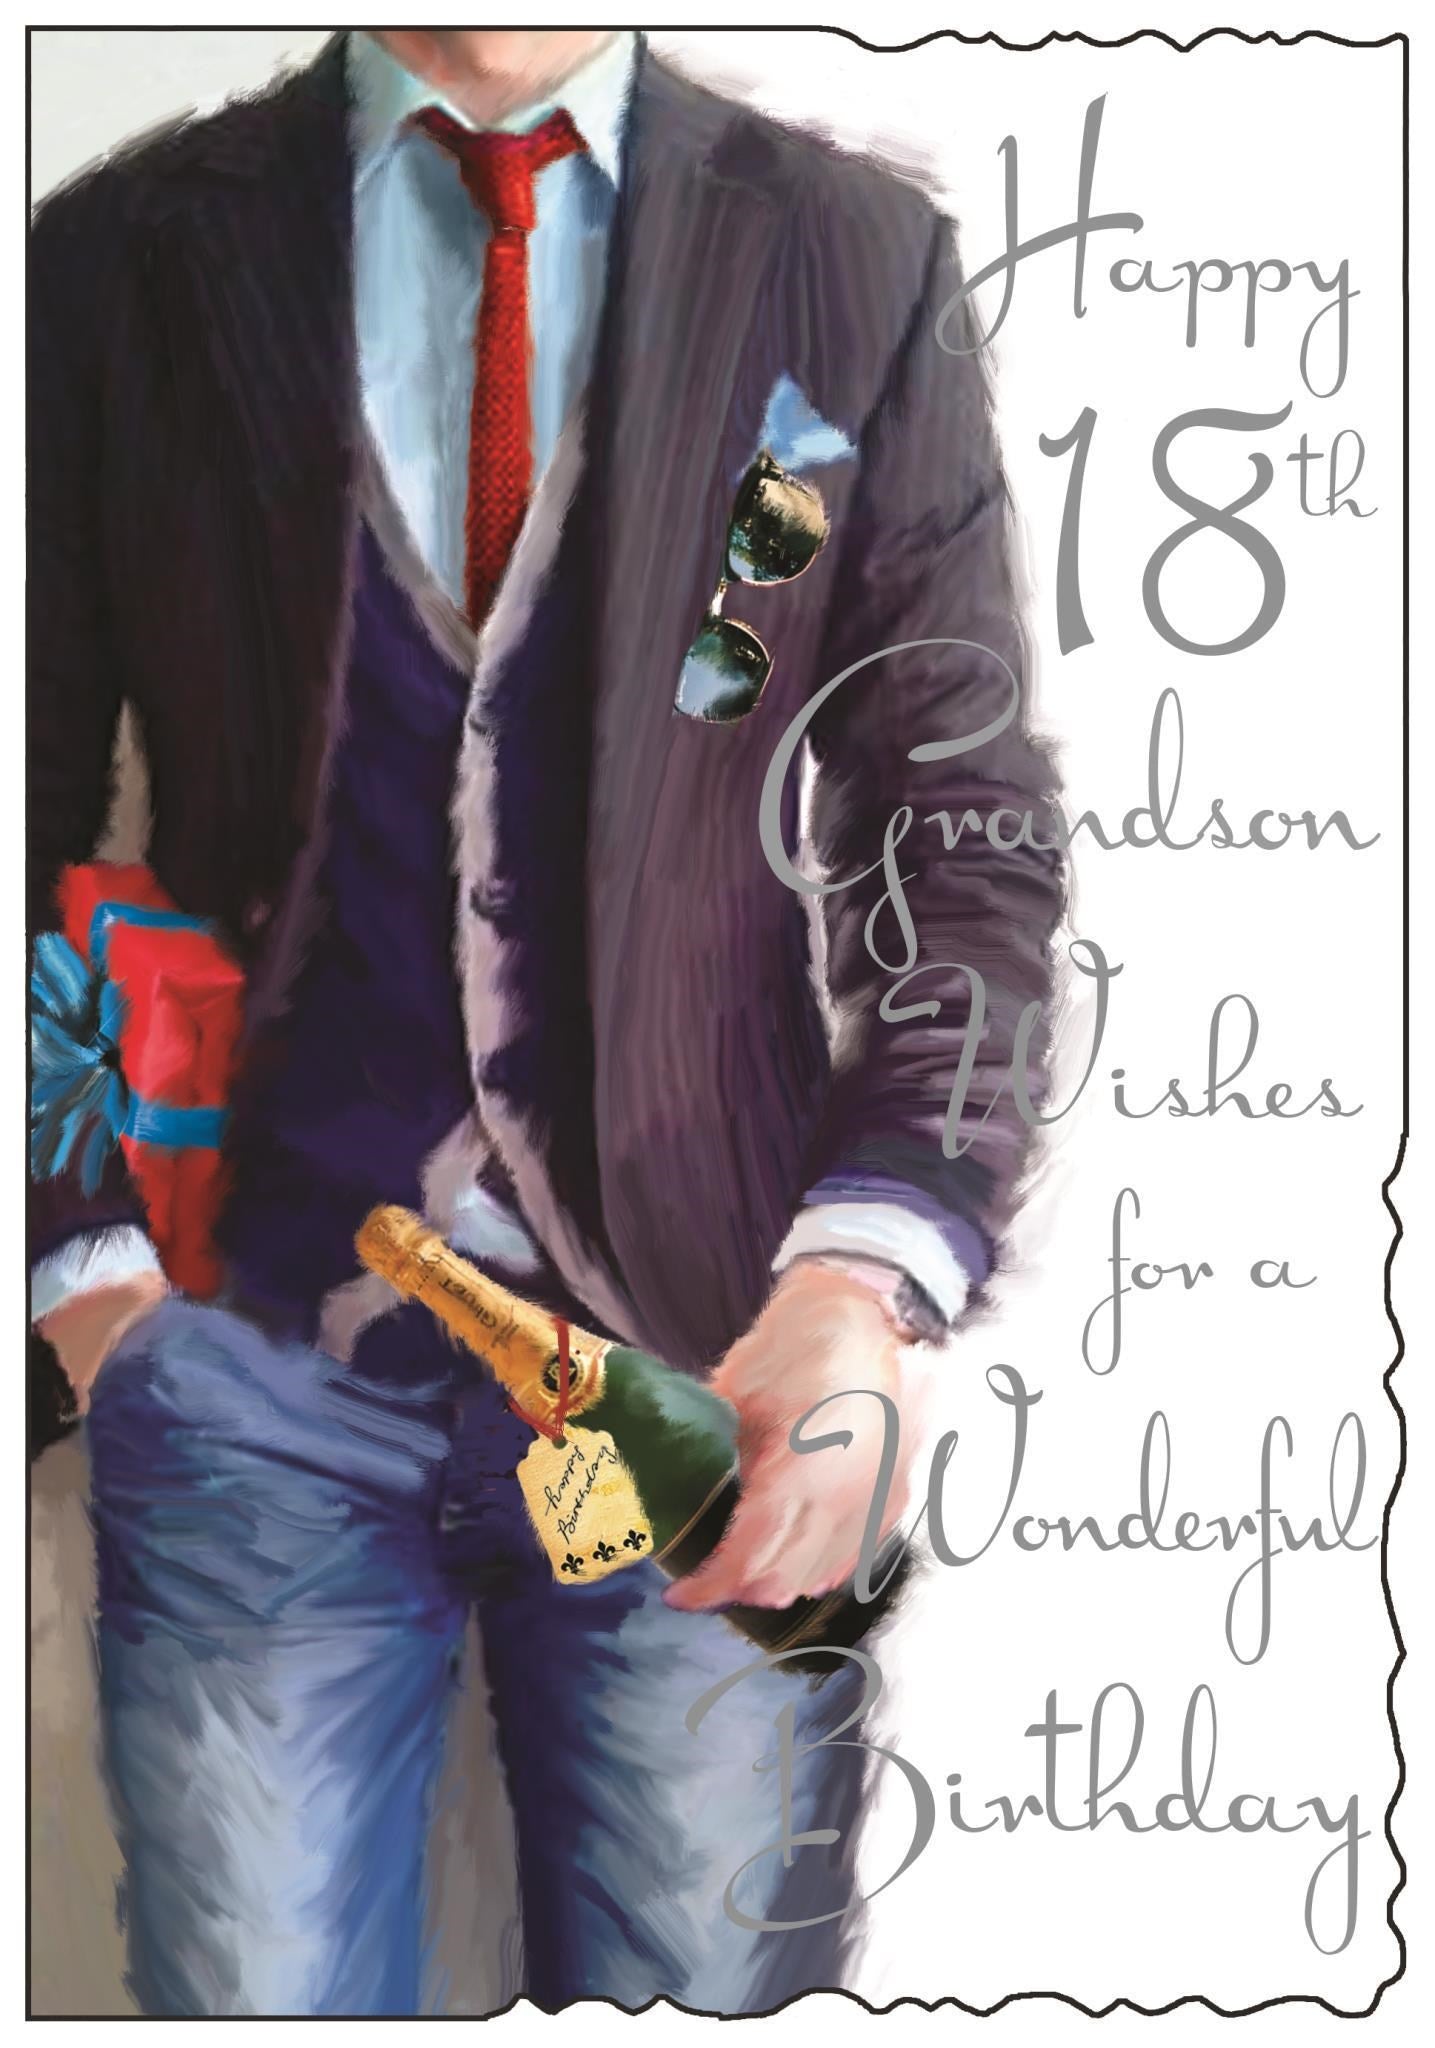 18th Grandson Birthday Card - Suited For The Special Occasion